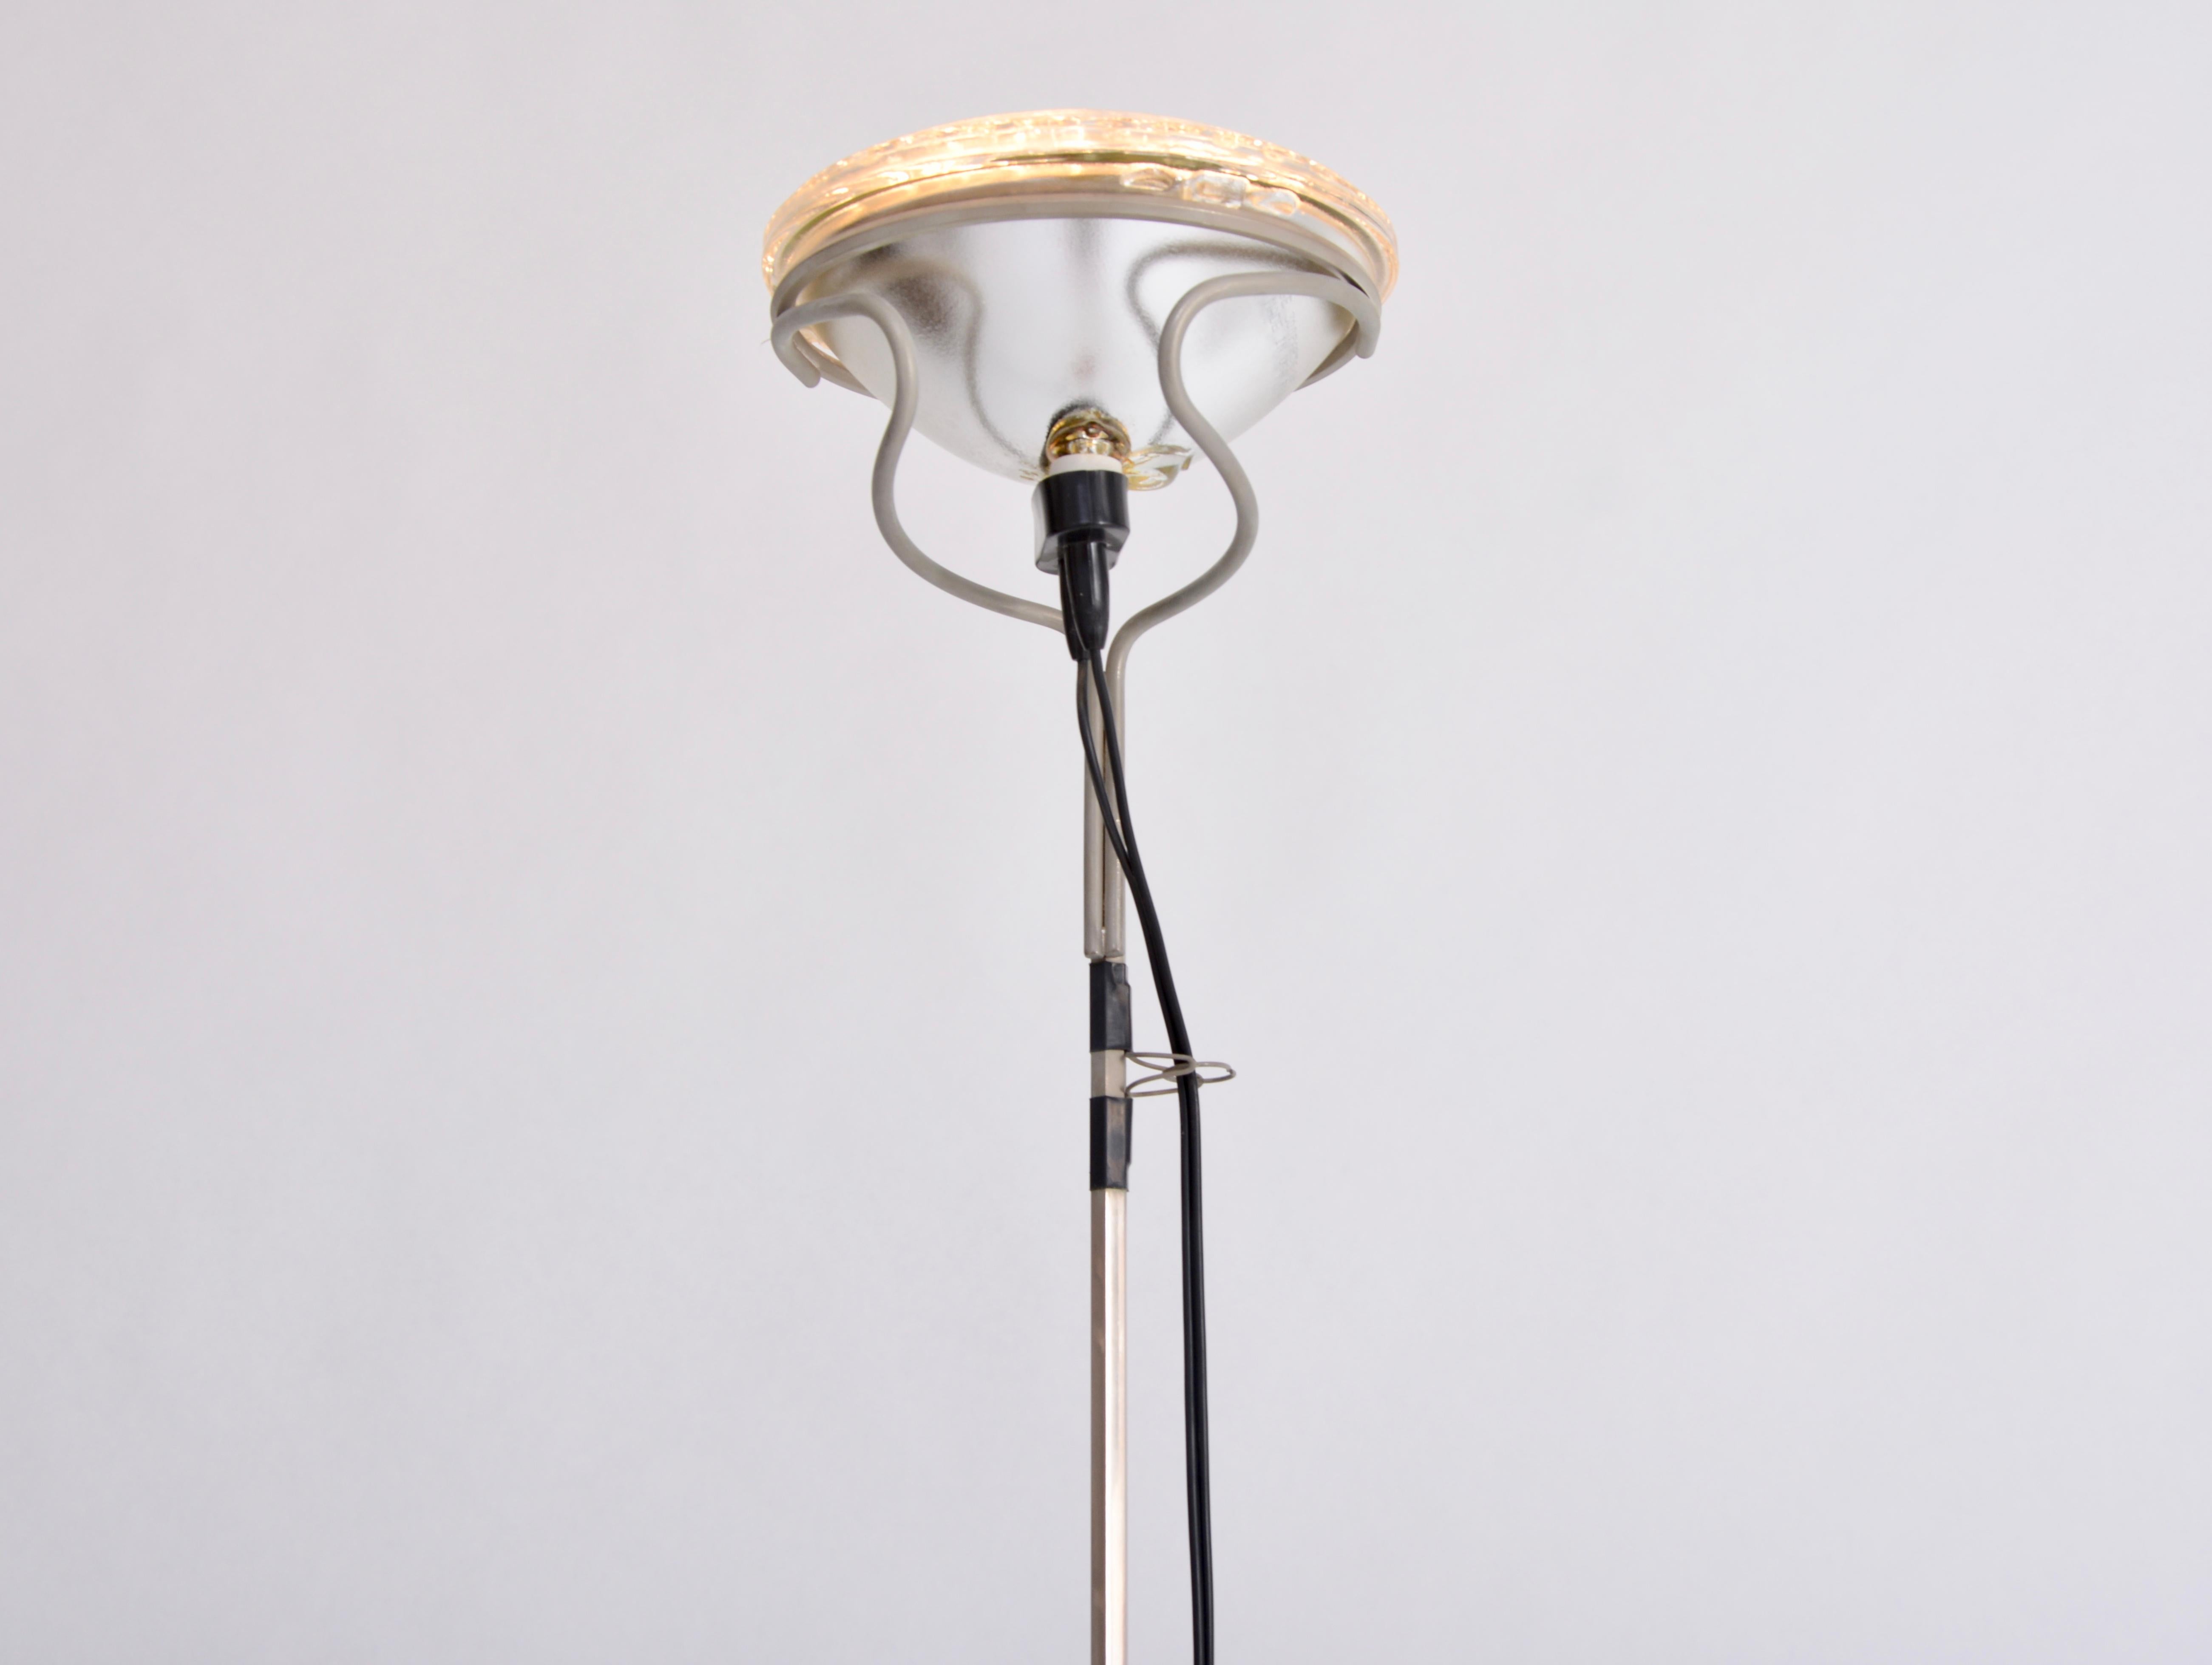 20th Century Red Toio Floor Lamp by Achille and Pier Giacomo Castiglioni for Flos, 1962